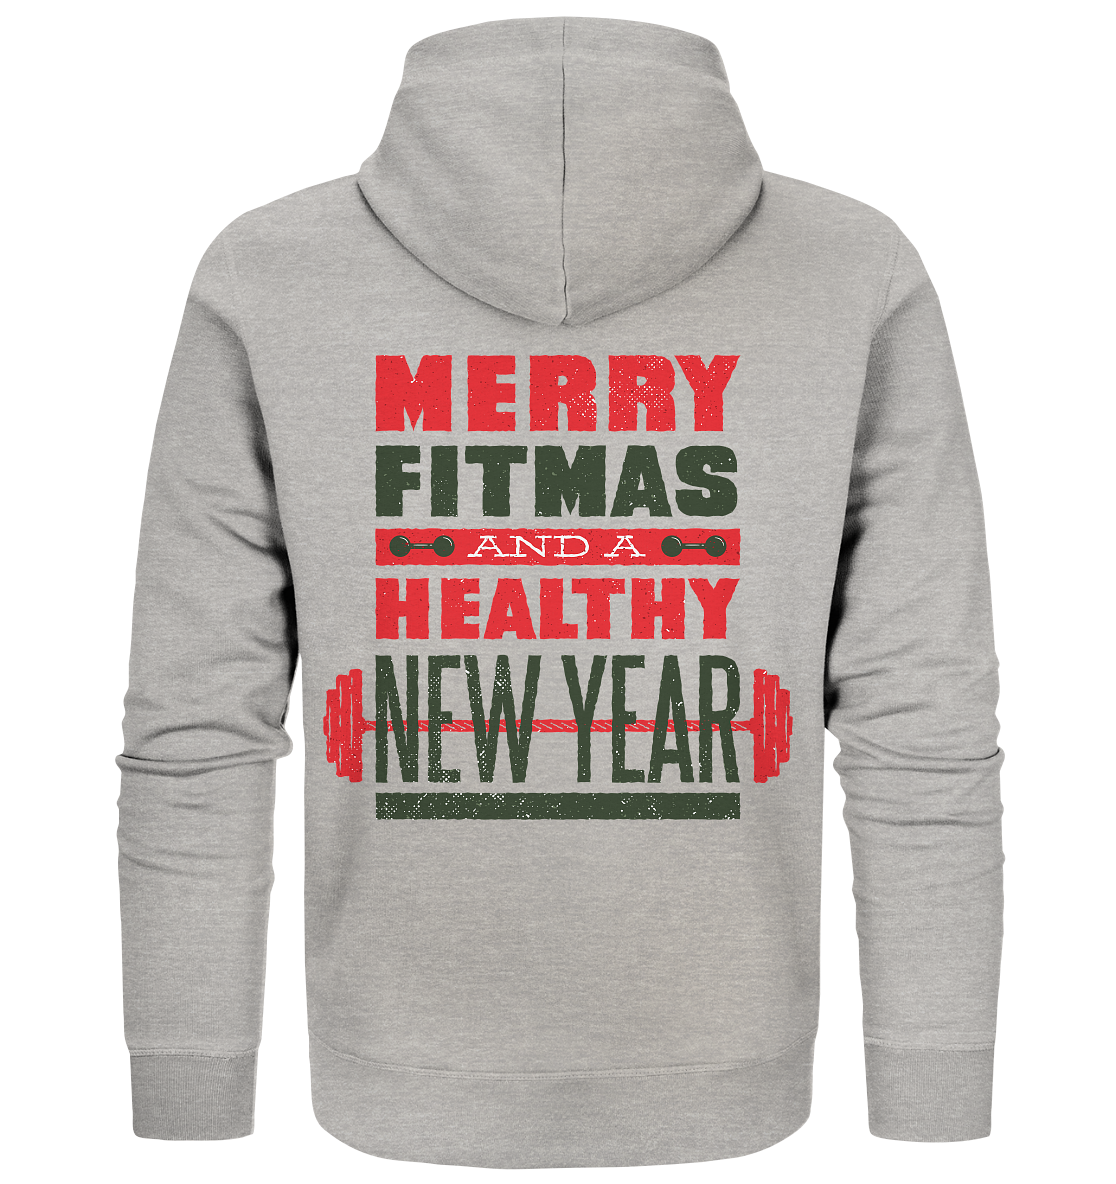 Weihnachtliches Design, Gym, Merry Fitmas and a Healthy New Year - Organic Zipper